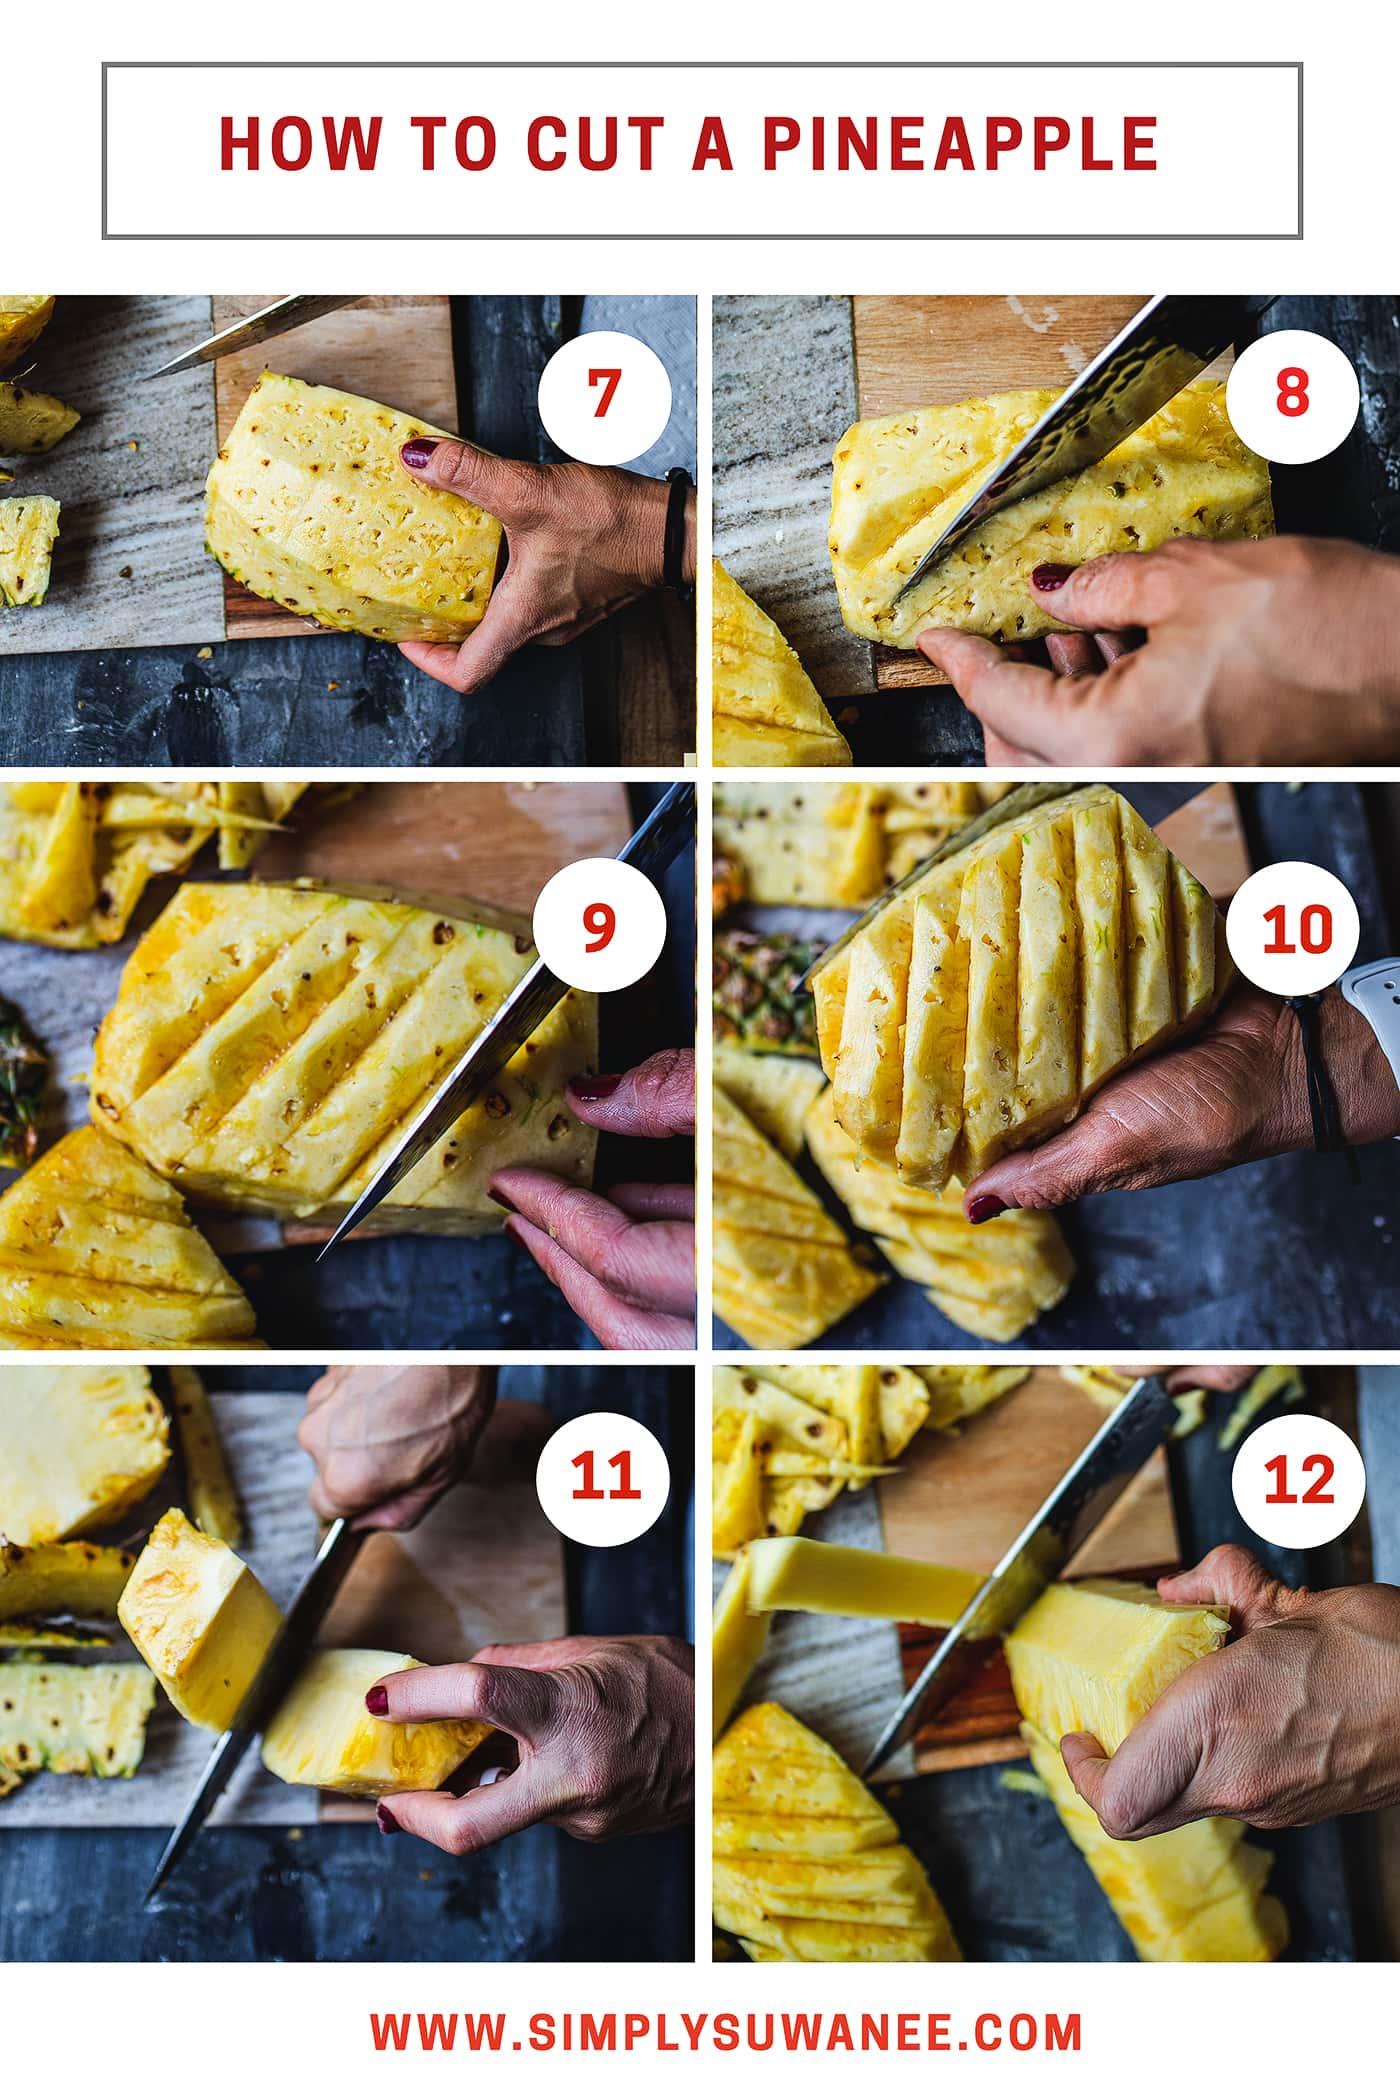 Do you love pineapples but have always been intimidated by how to cut them? Today, I